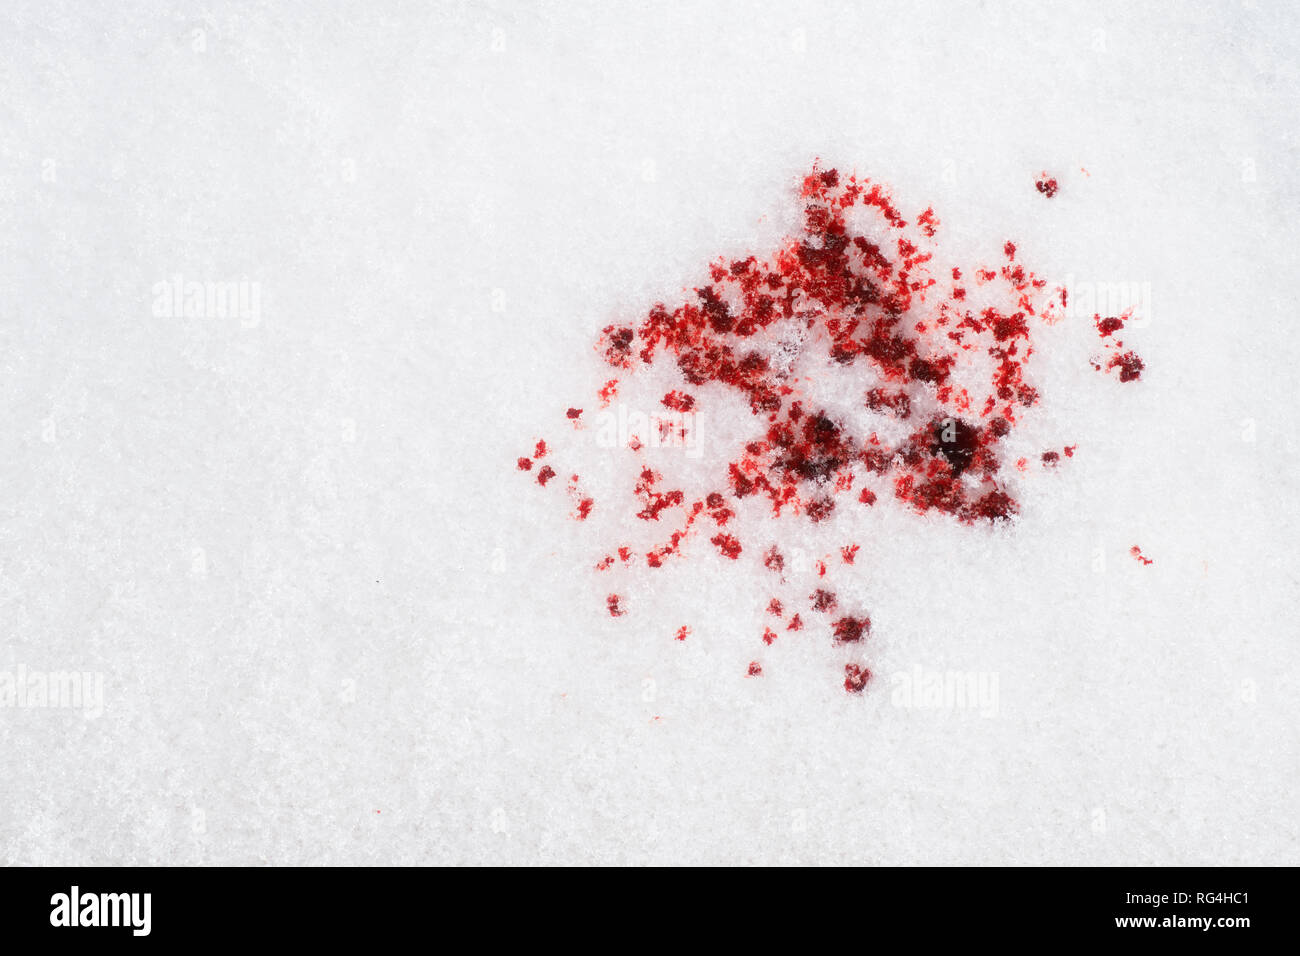 Red blood drops on white snow. Criminal, violence, disaster and accident concept Stock Photo